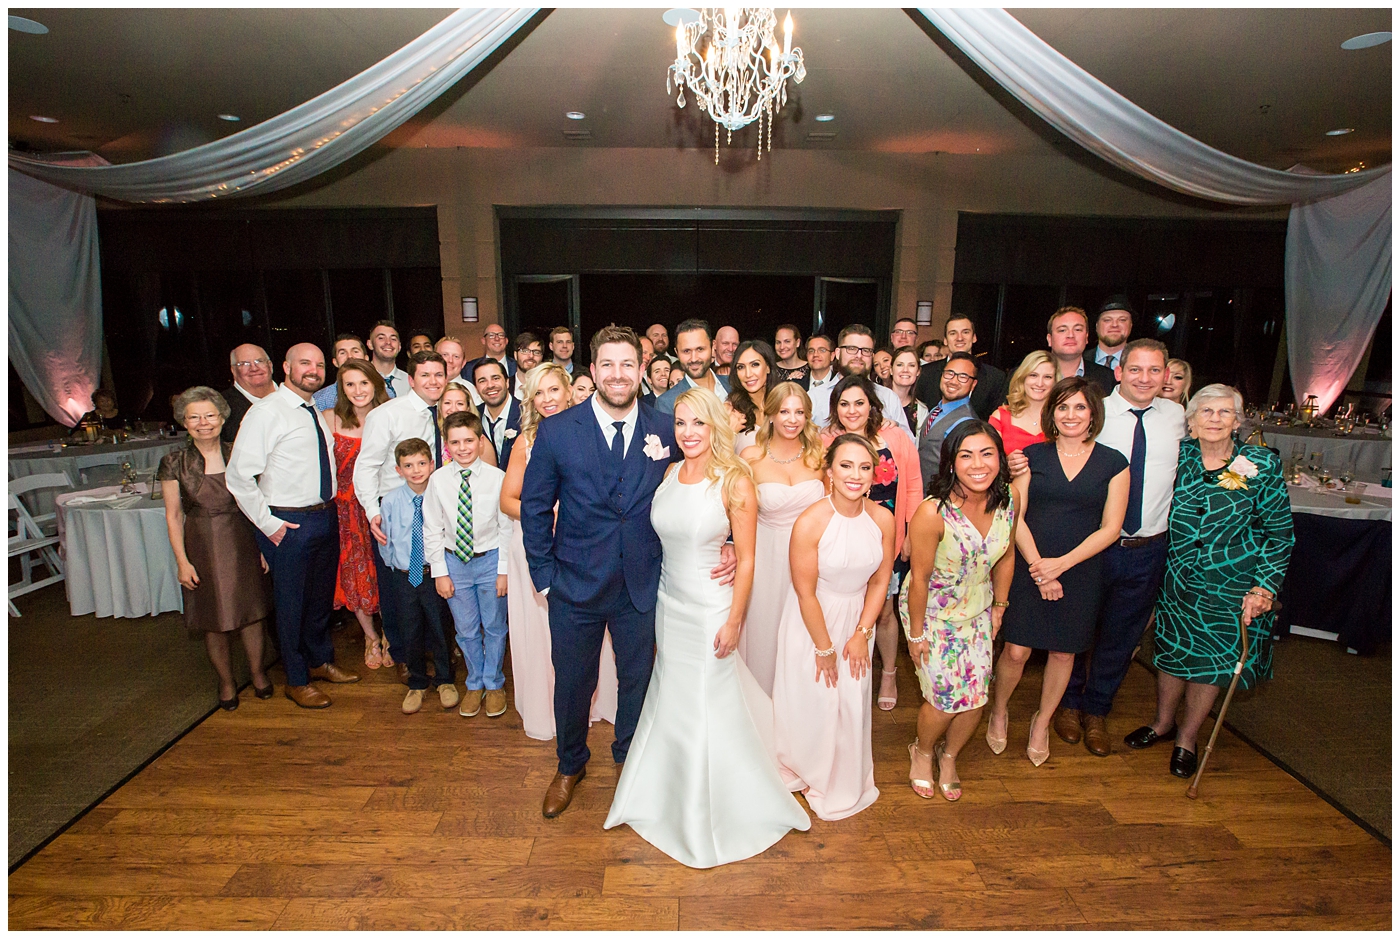 gorgeous bride with side swept hair in racerback pronovias dress and blush pink, white rose and eucalyptus greenery wedding bouquet with groom in navy suit and tie with all their guests at wedding reception in ballroom